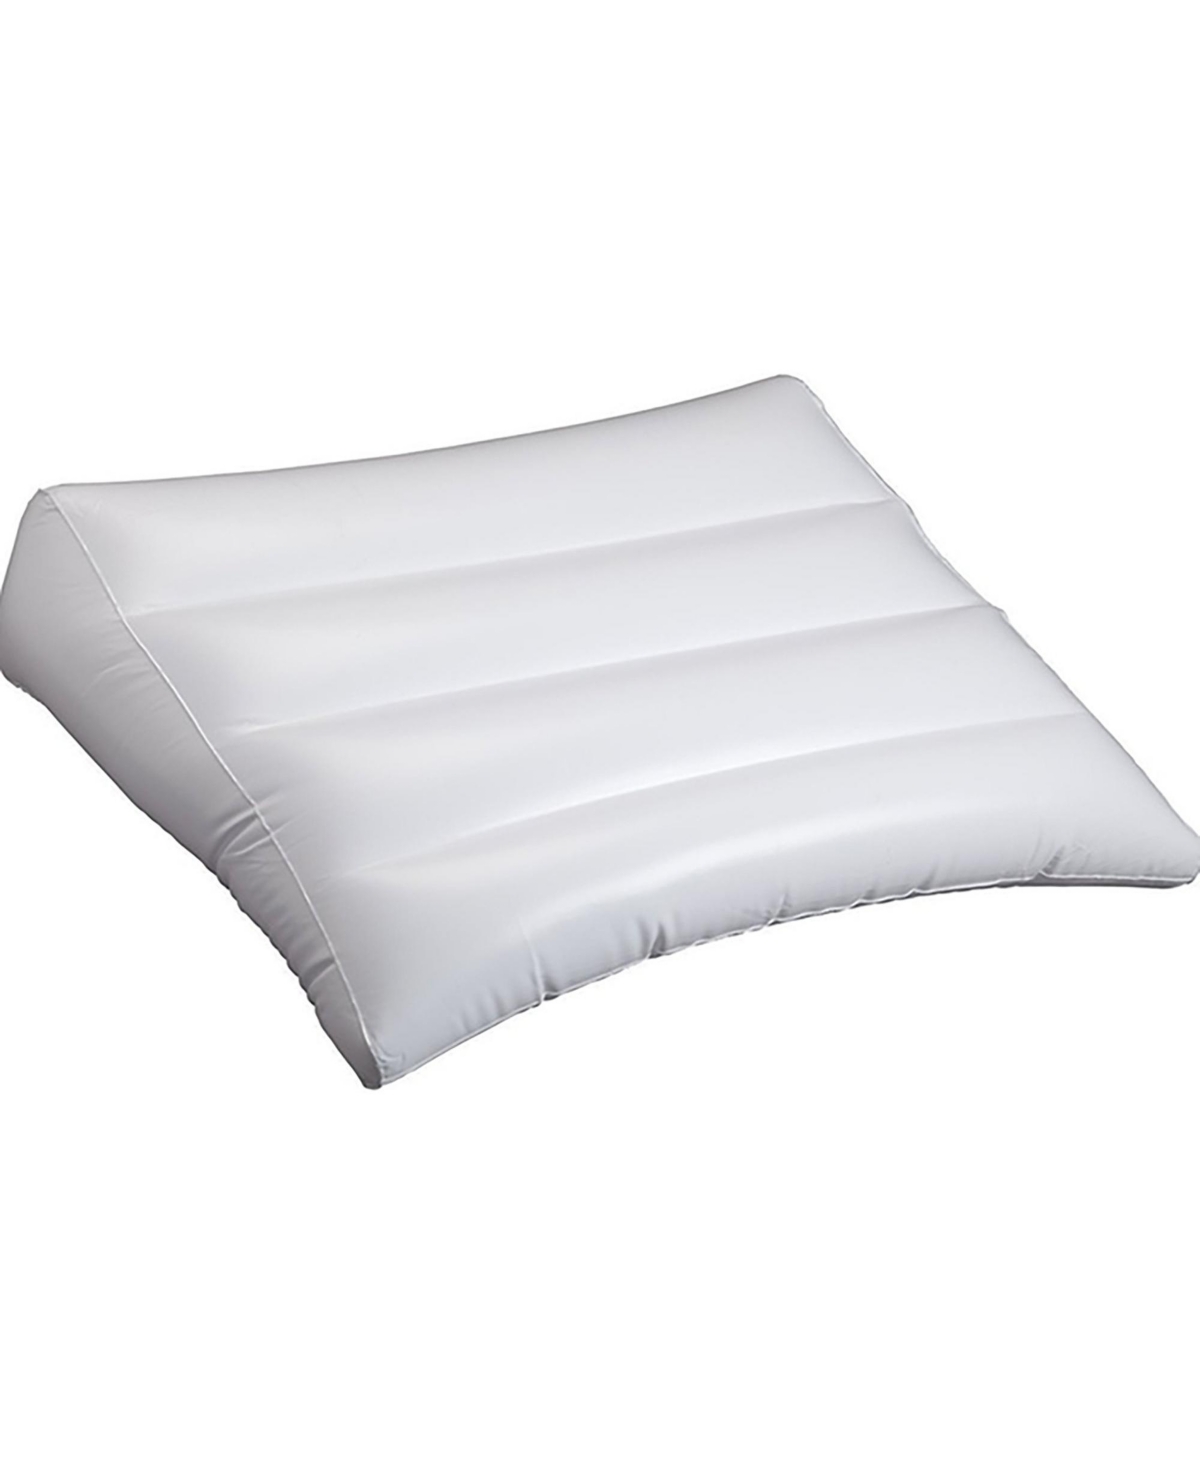 DR PILLOW INFLATABLE PILLOW WEDGE